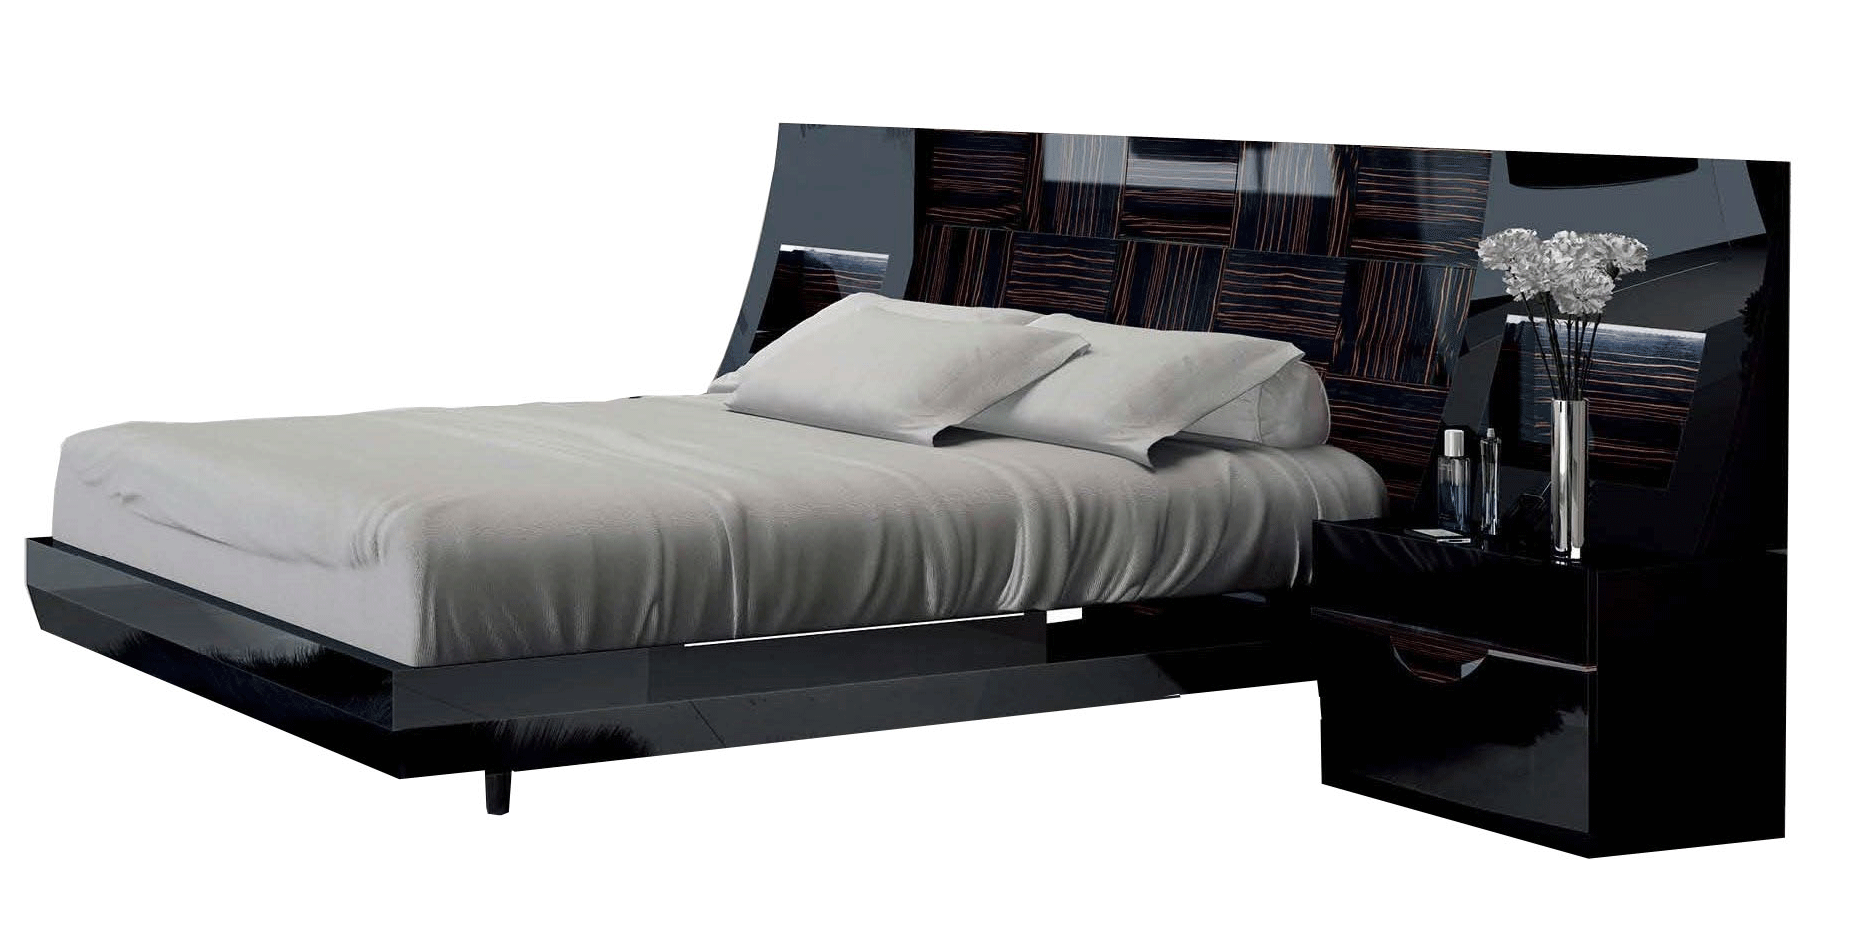 Bedroom Furniture Dressers and Chests Marbella Bed QS bed ONLY